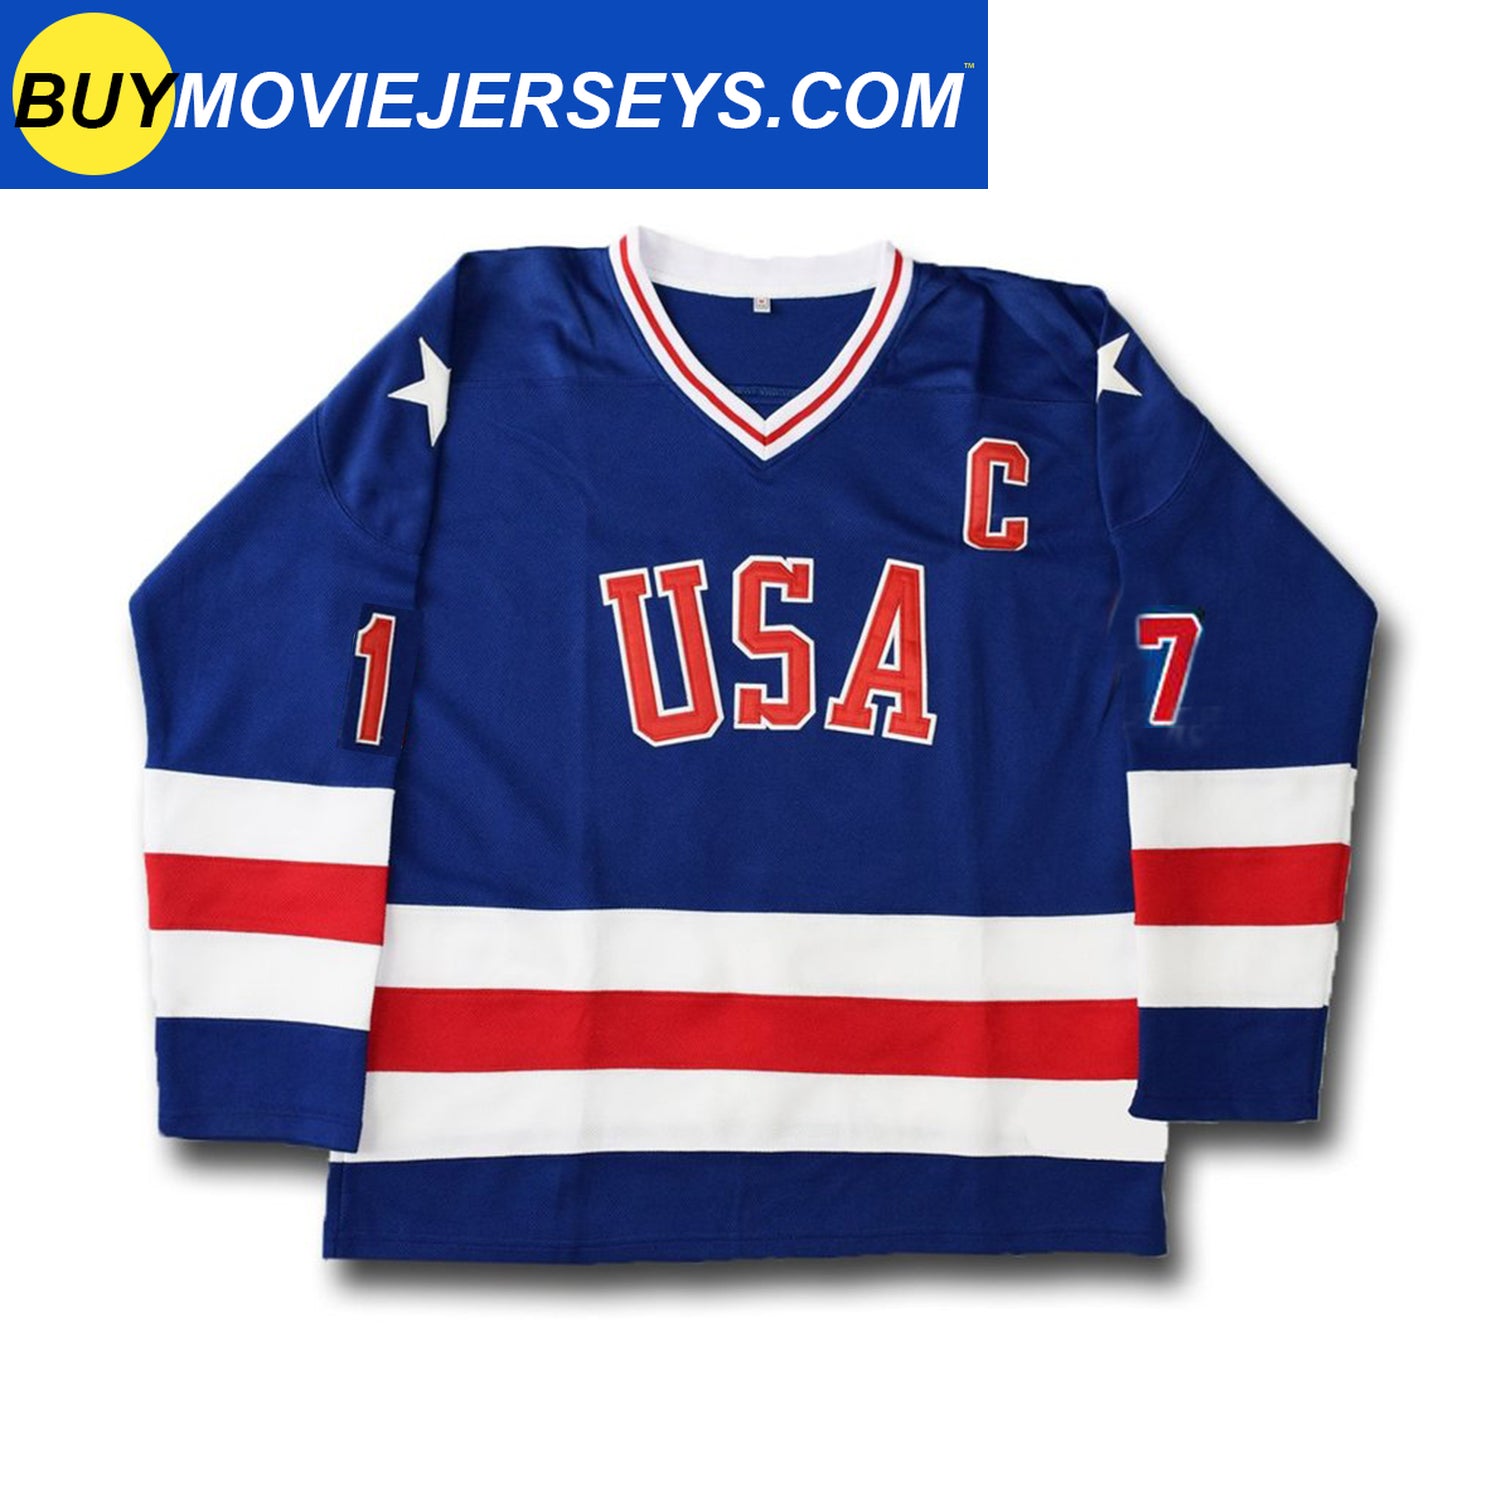 Miracle on Ice USA National Hockey Team Jersey Sweater 